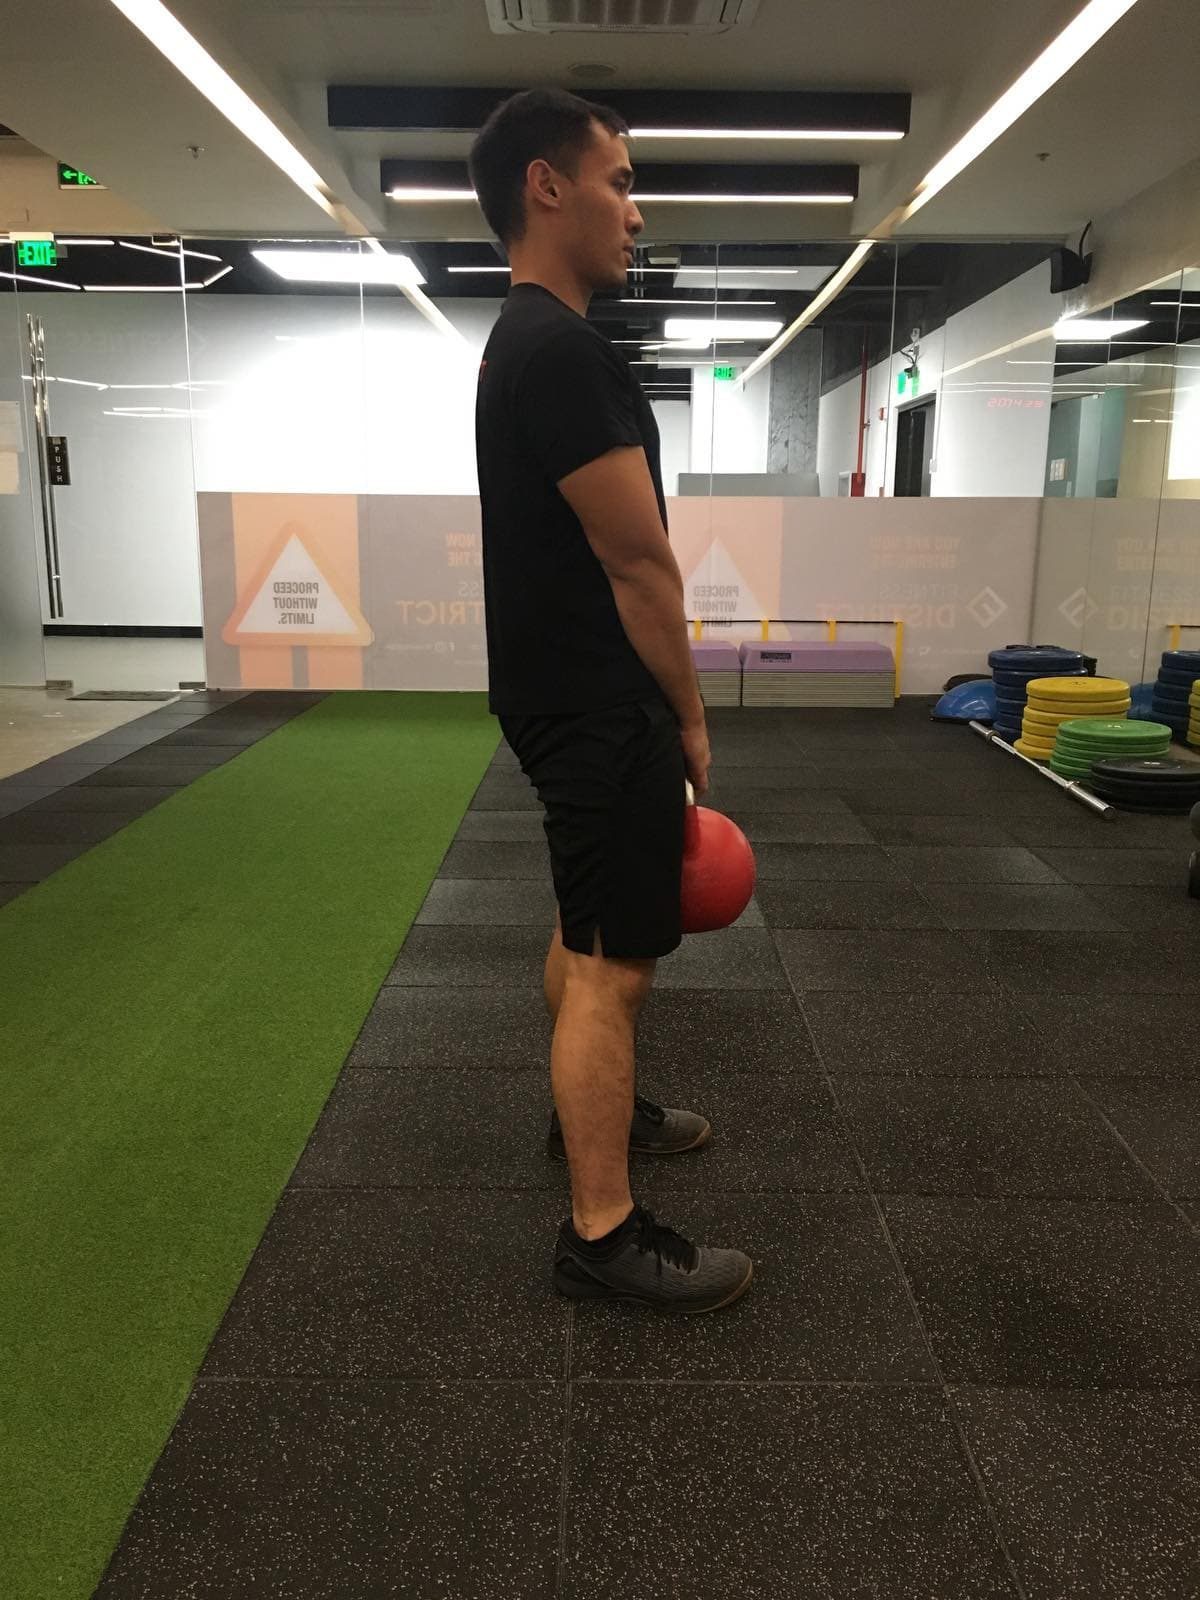 Exercises for the trail: When doing this, avoid hyperextending your lowerback